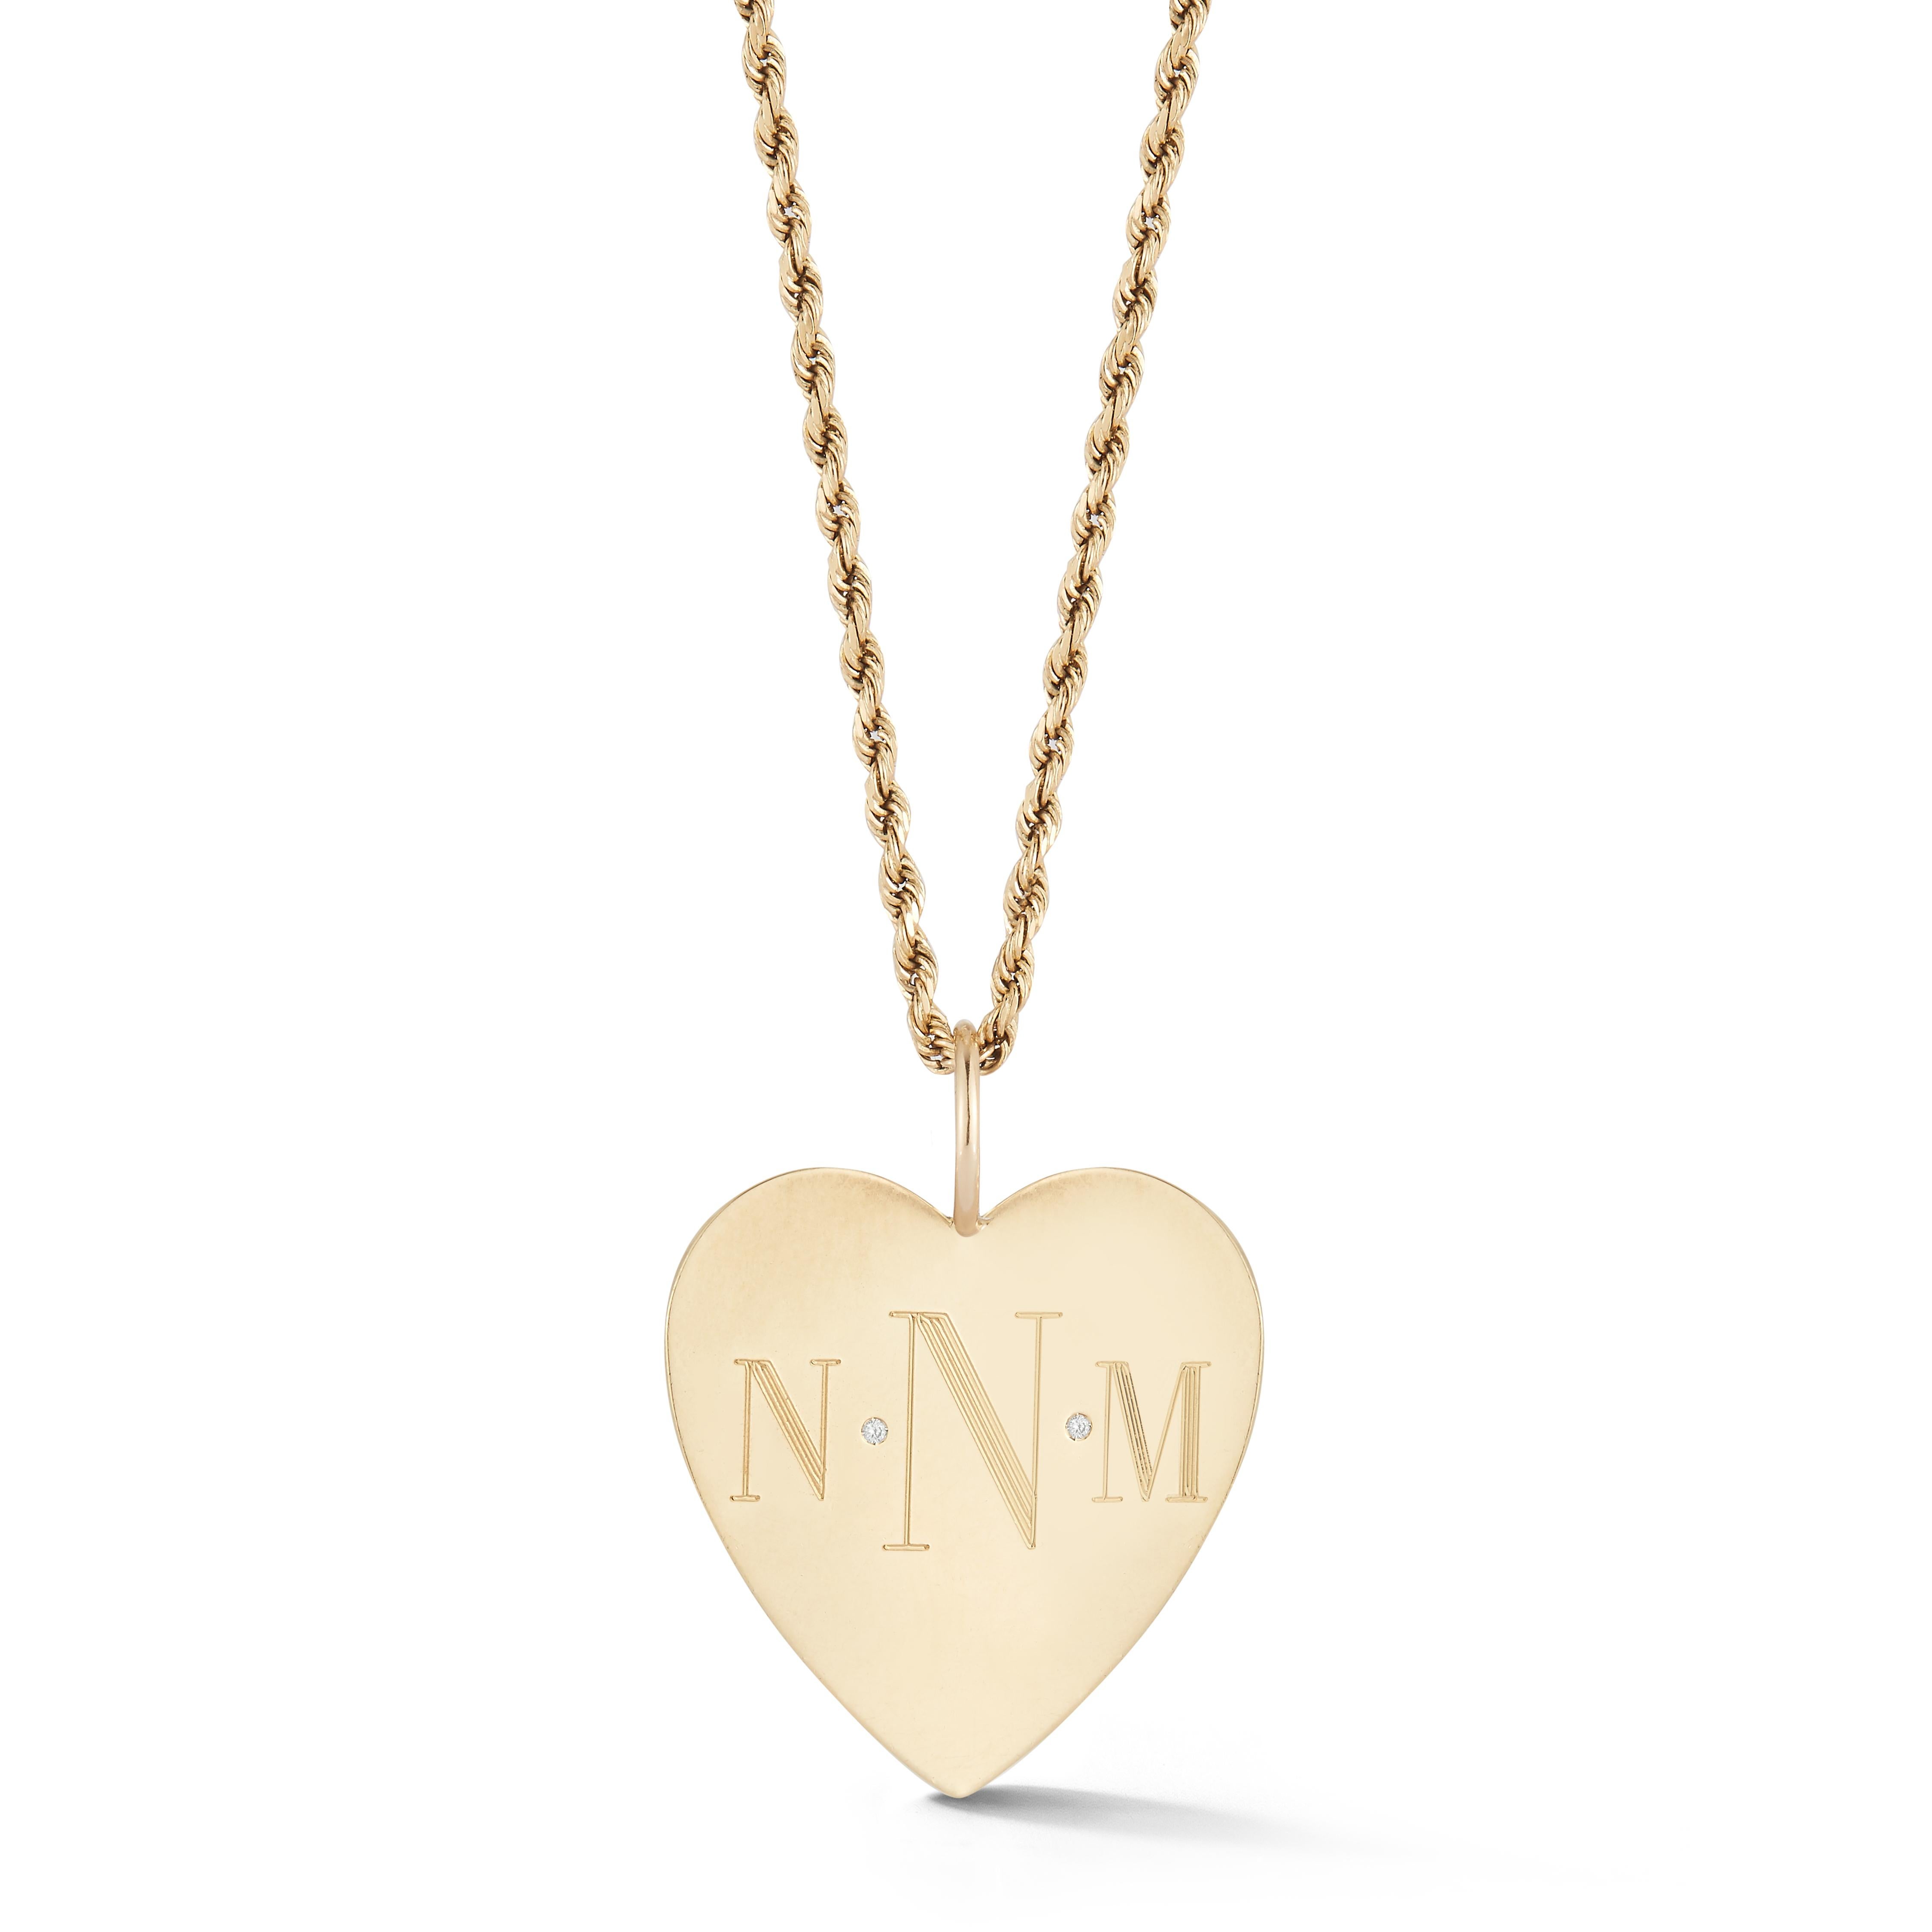 Garland Collection Medium Solid Gold Heart Charm Pendant For Sale 3